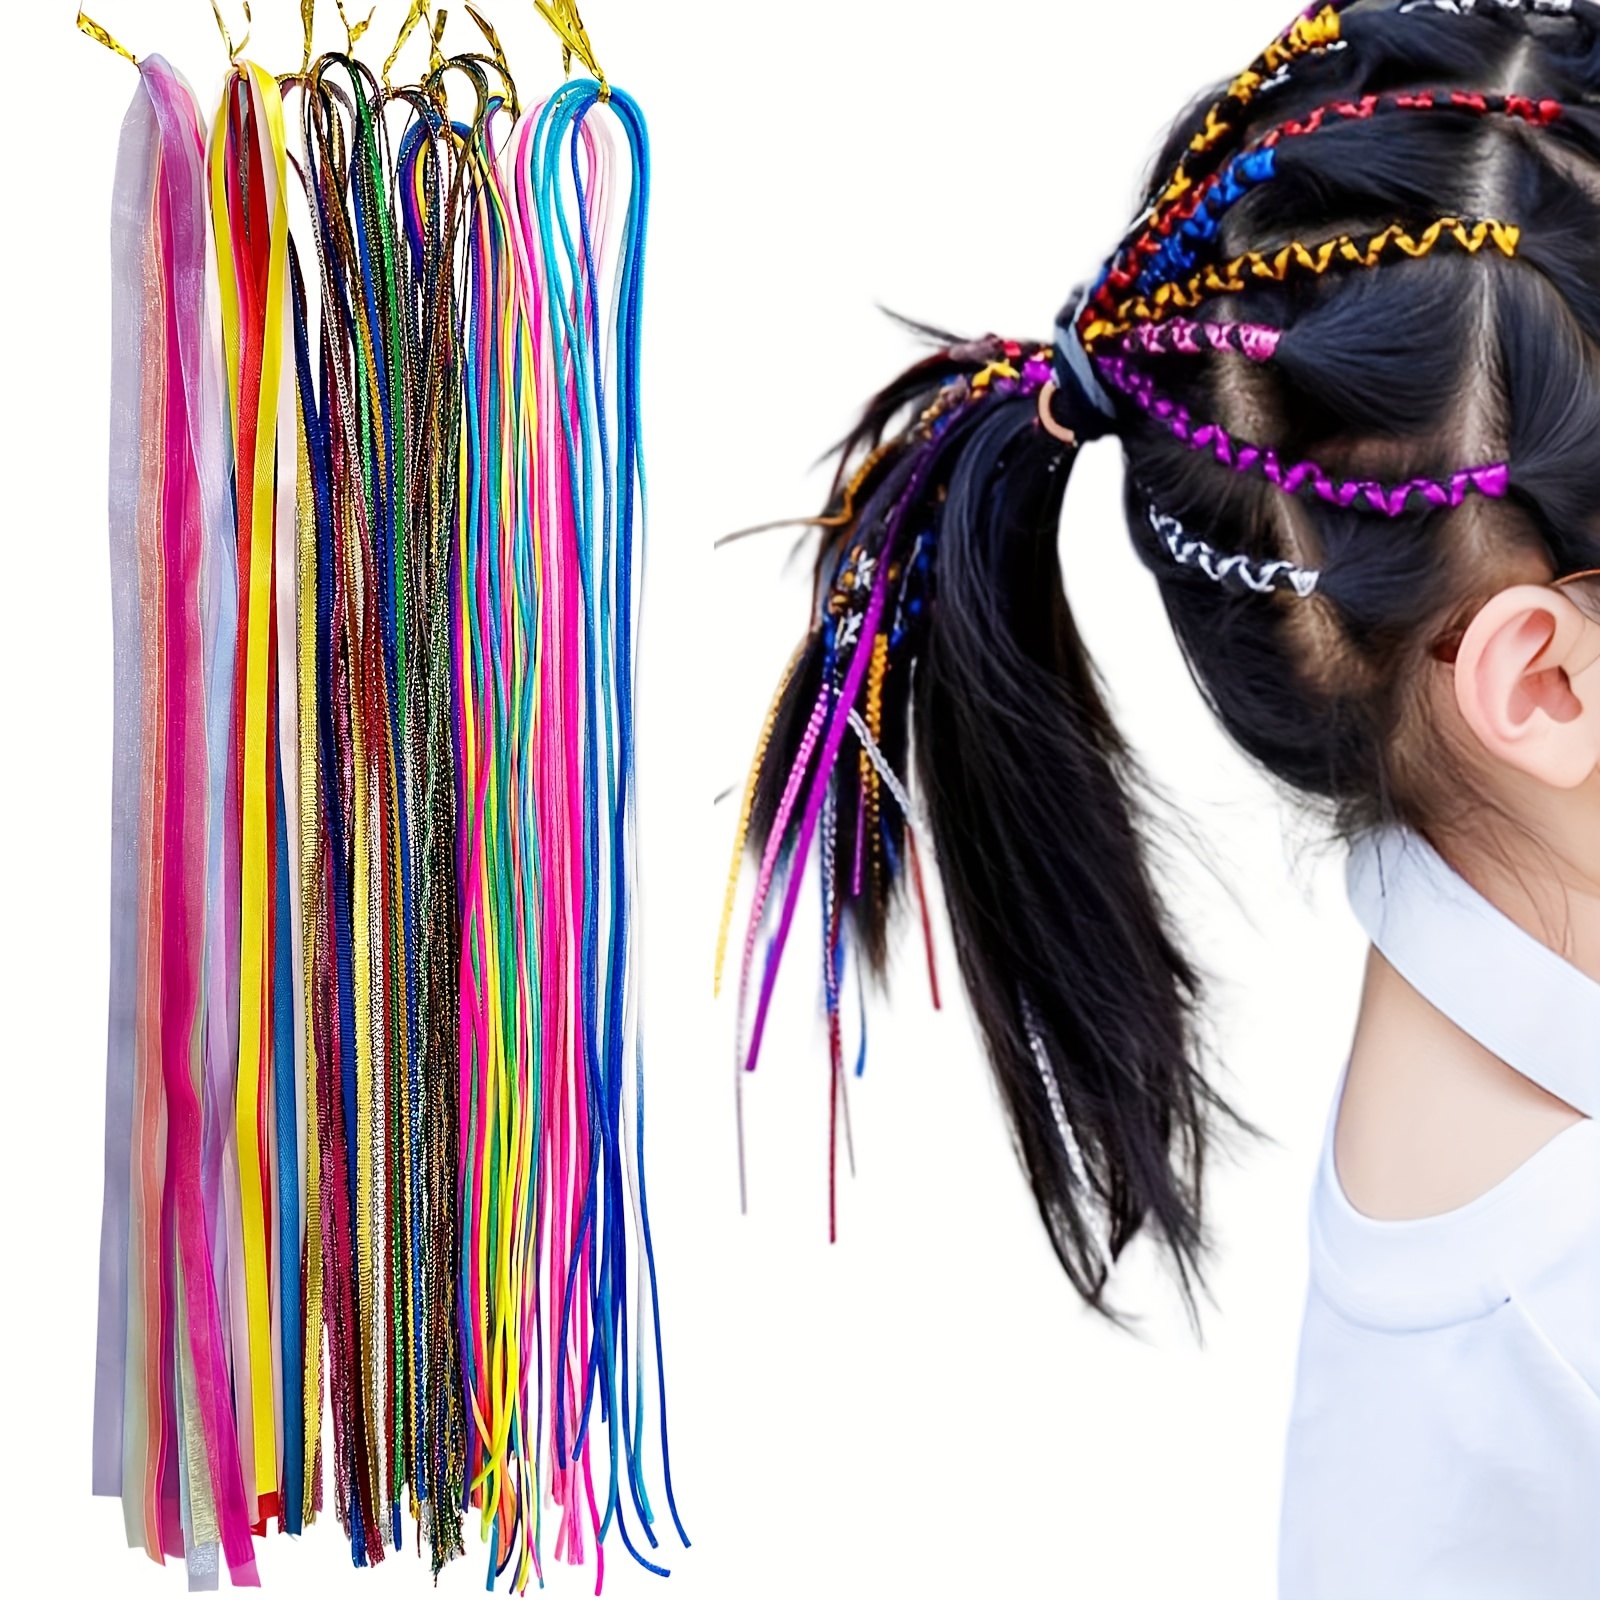  50pcs Hair Braids Assorted Gradient Colorful Braided Hair Rope  Band Set for Ponytail braids Women Girl DIY Braid Hair Styling Accessories  Wraps : Beauty & Personal Care